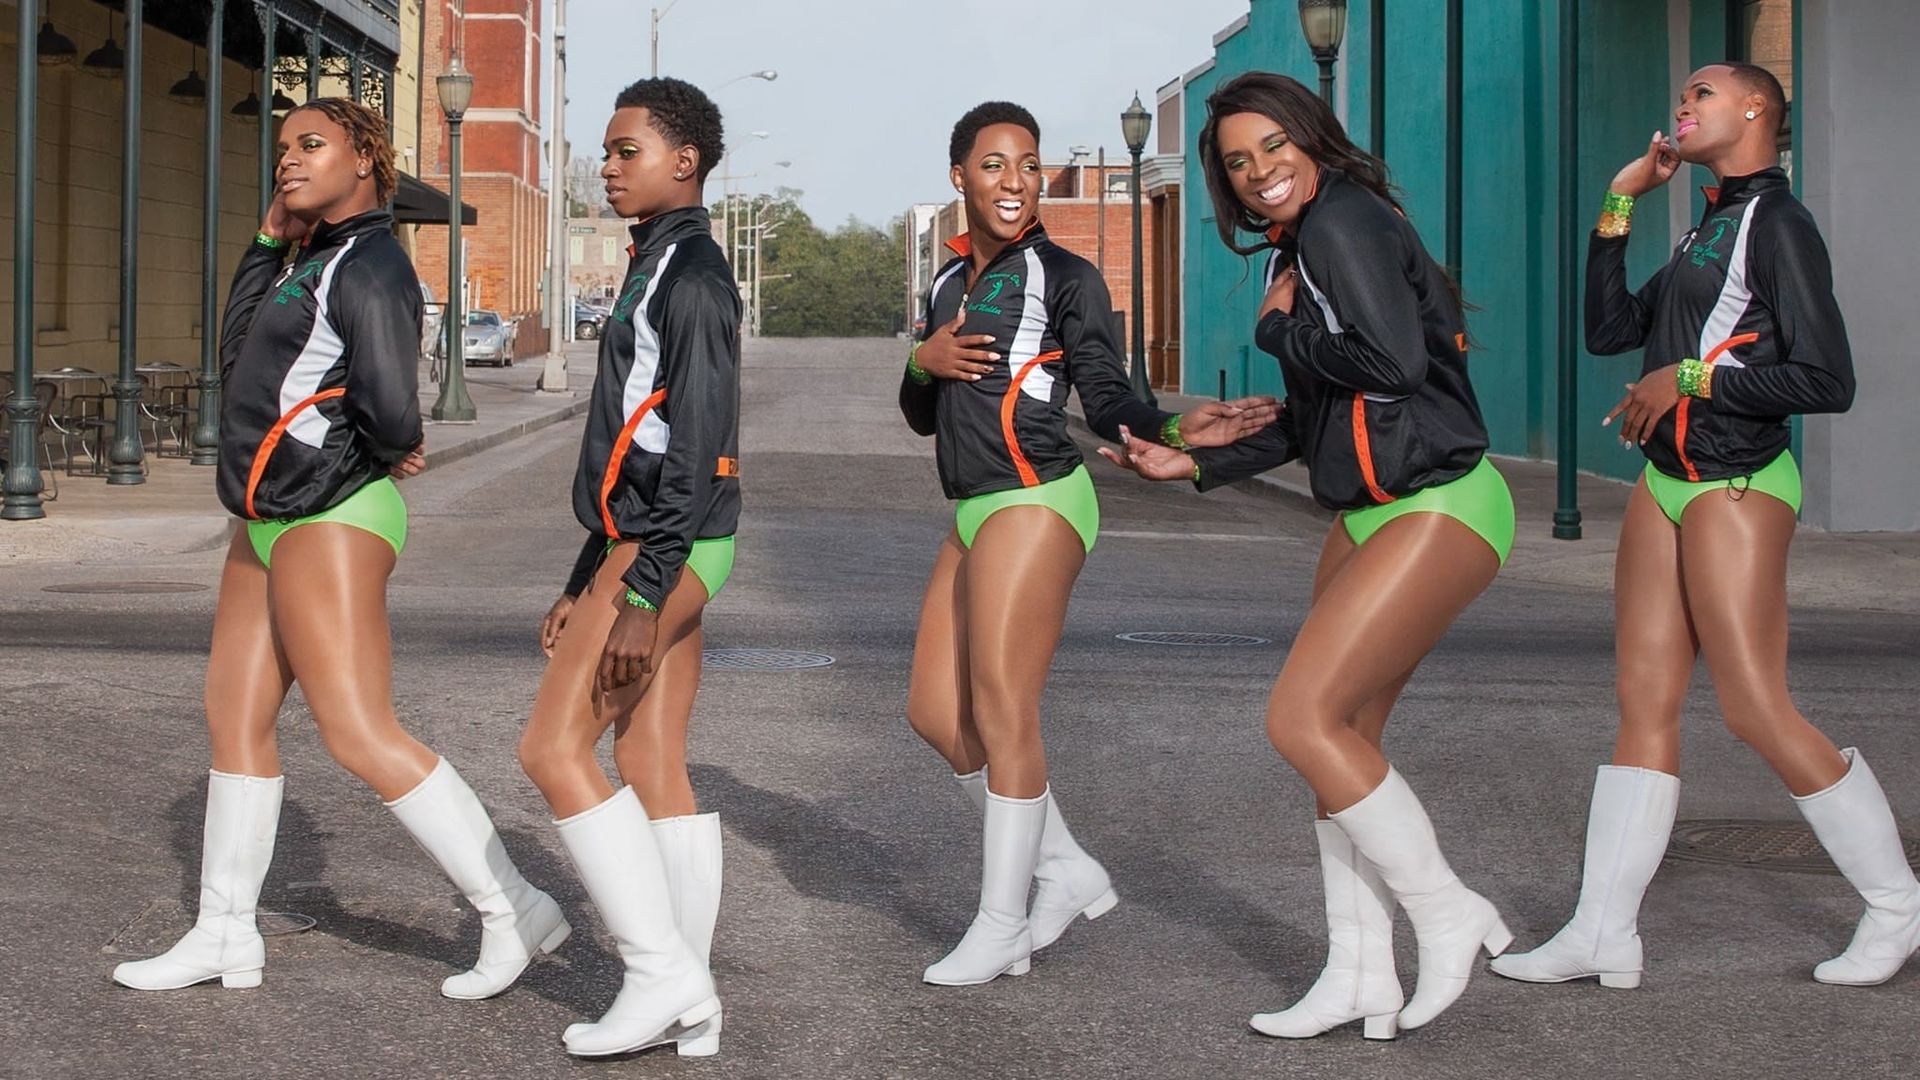 The Prancing Elites Project background